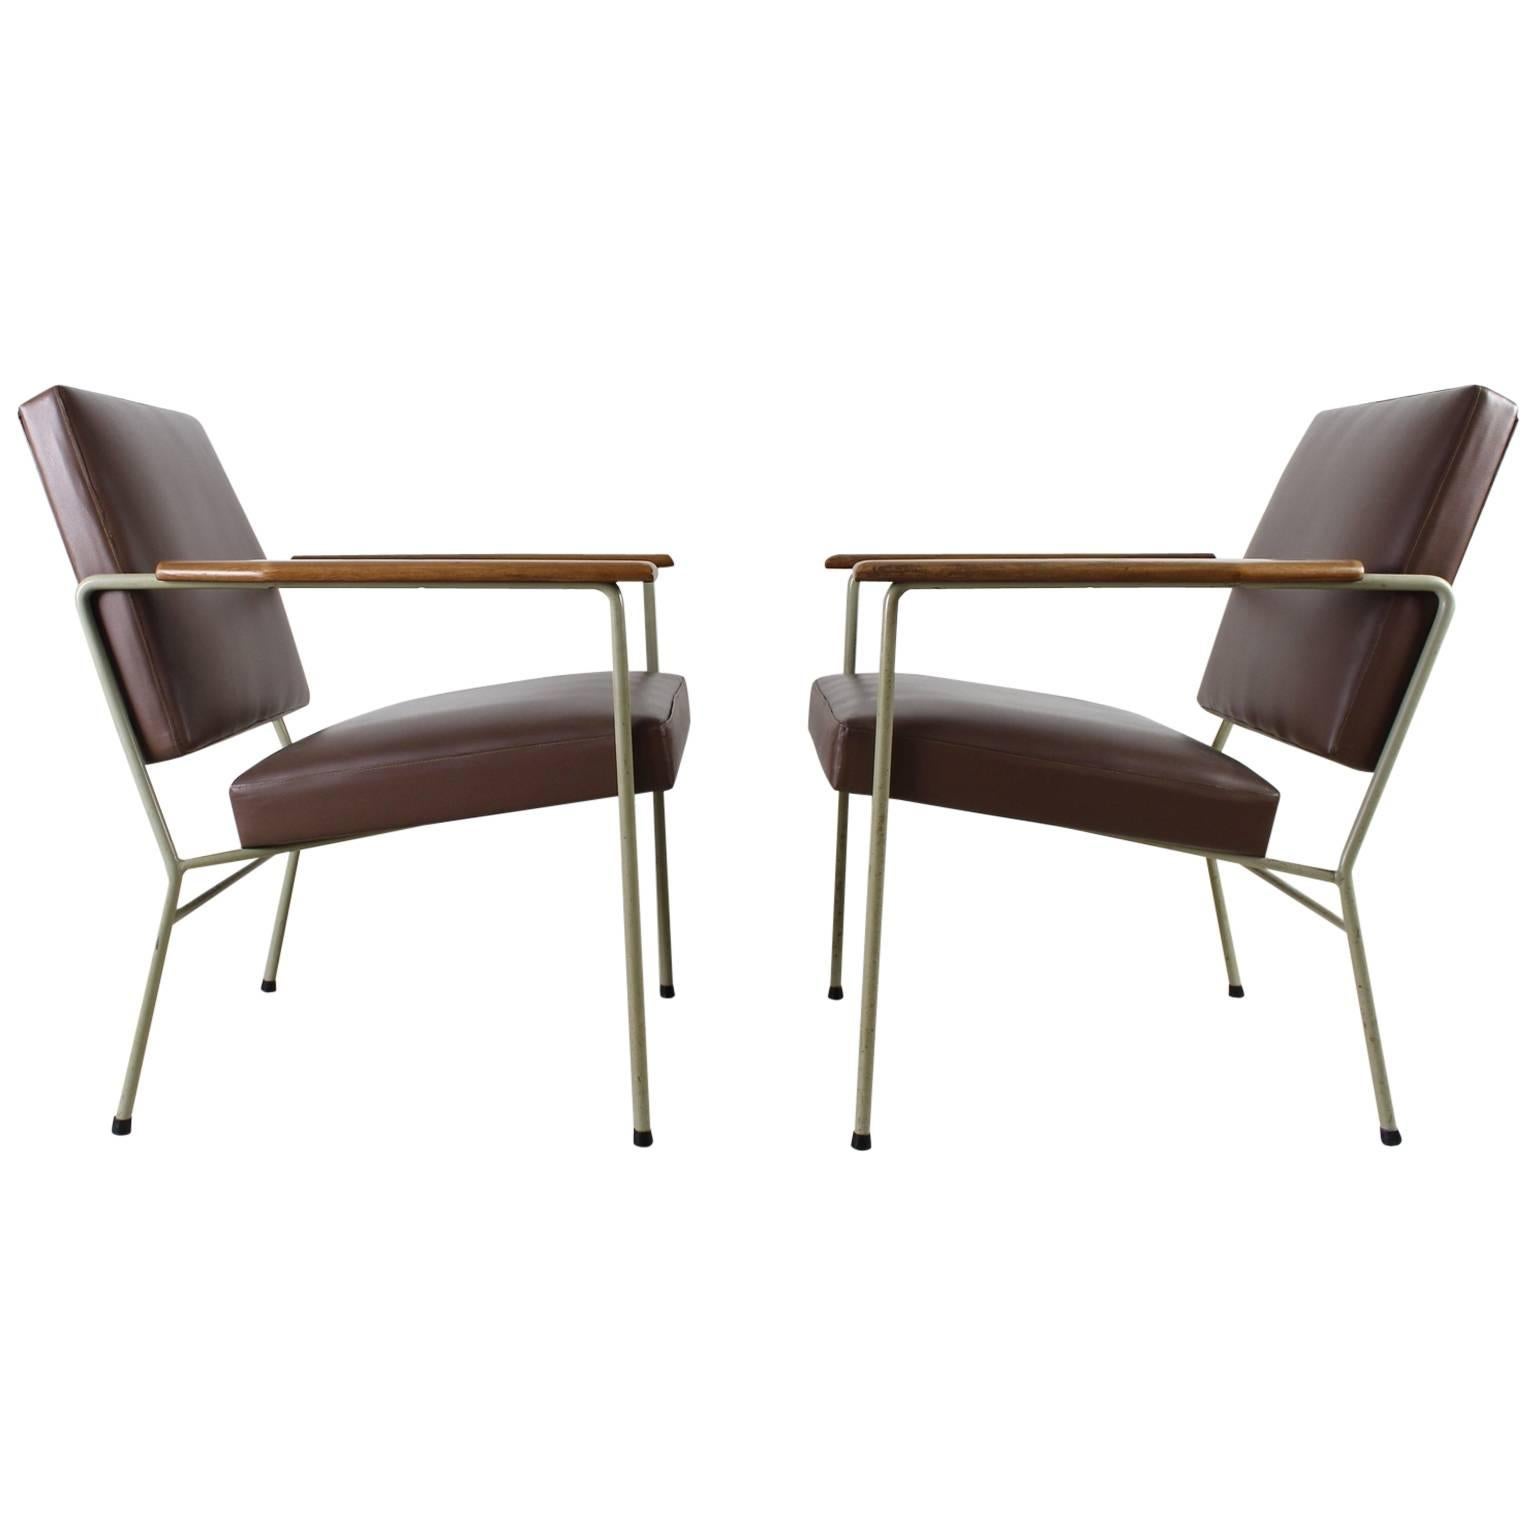 Very Minimalistic Set of Two Dutch Design Easy Armchairs For Sale